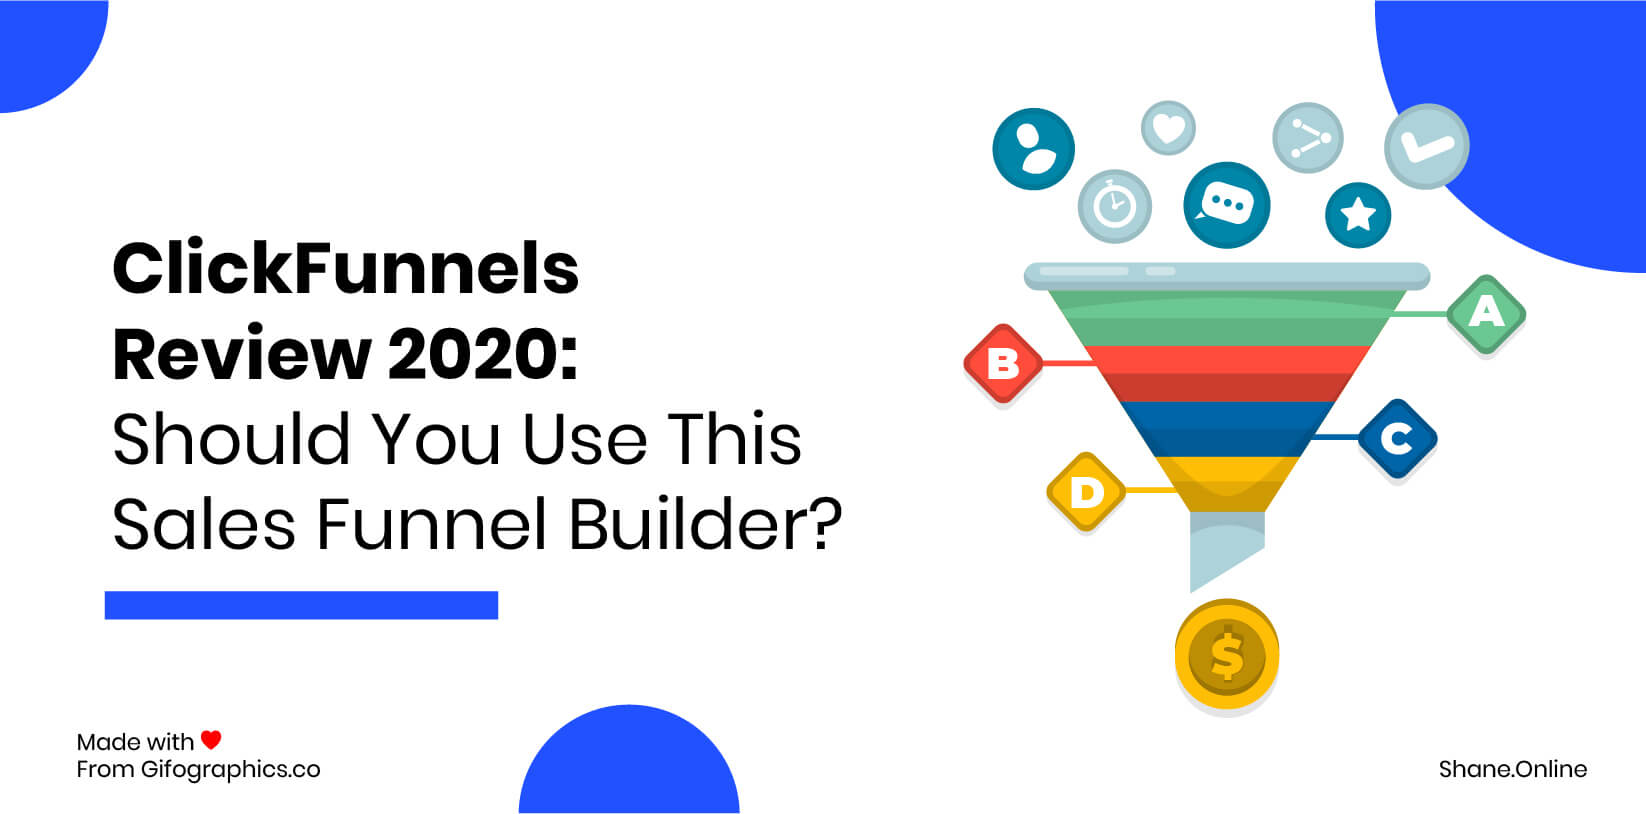 What Clickfunnels Funnel Should I Use For Promoting Paid Surveys?